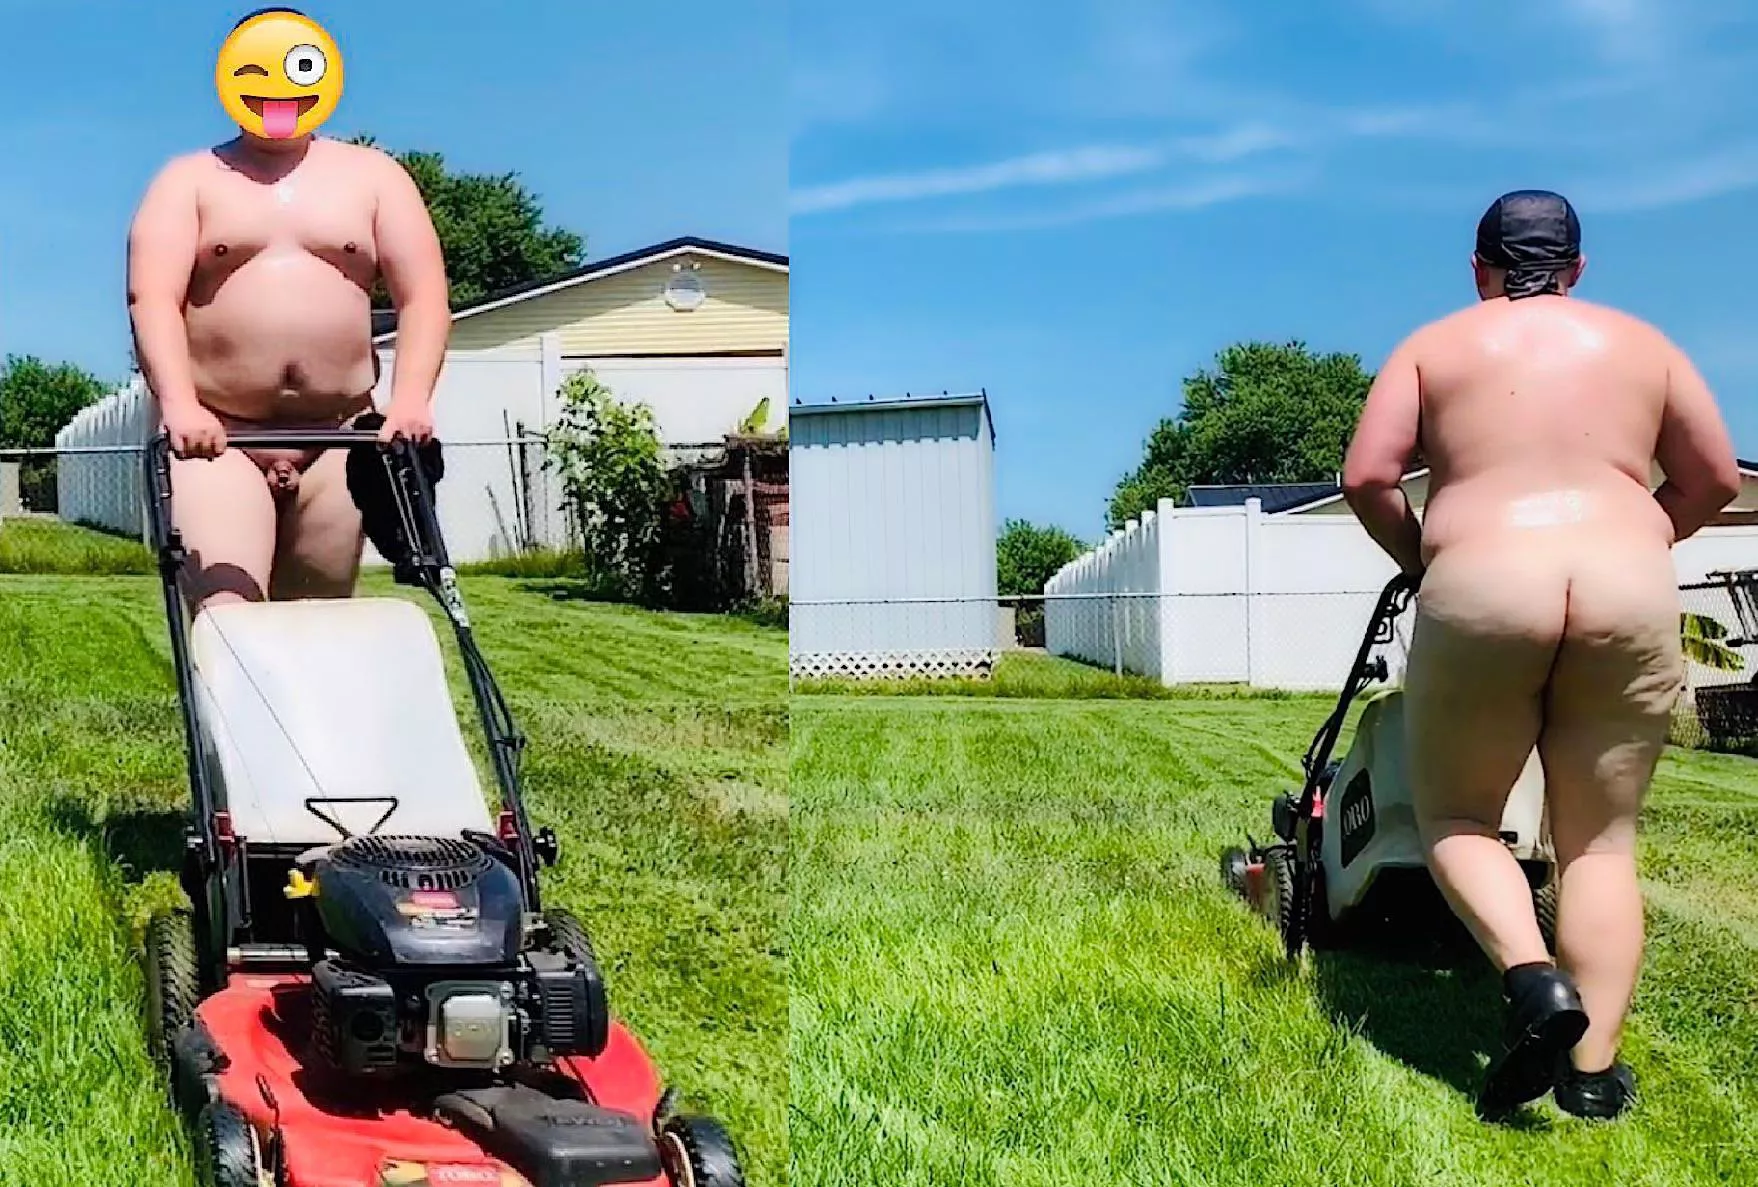 Mowing grass naked